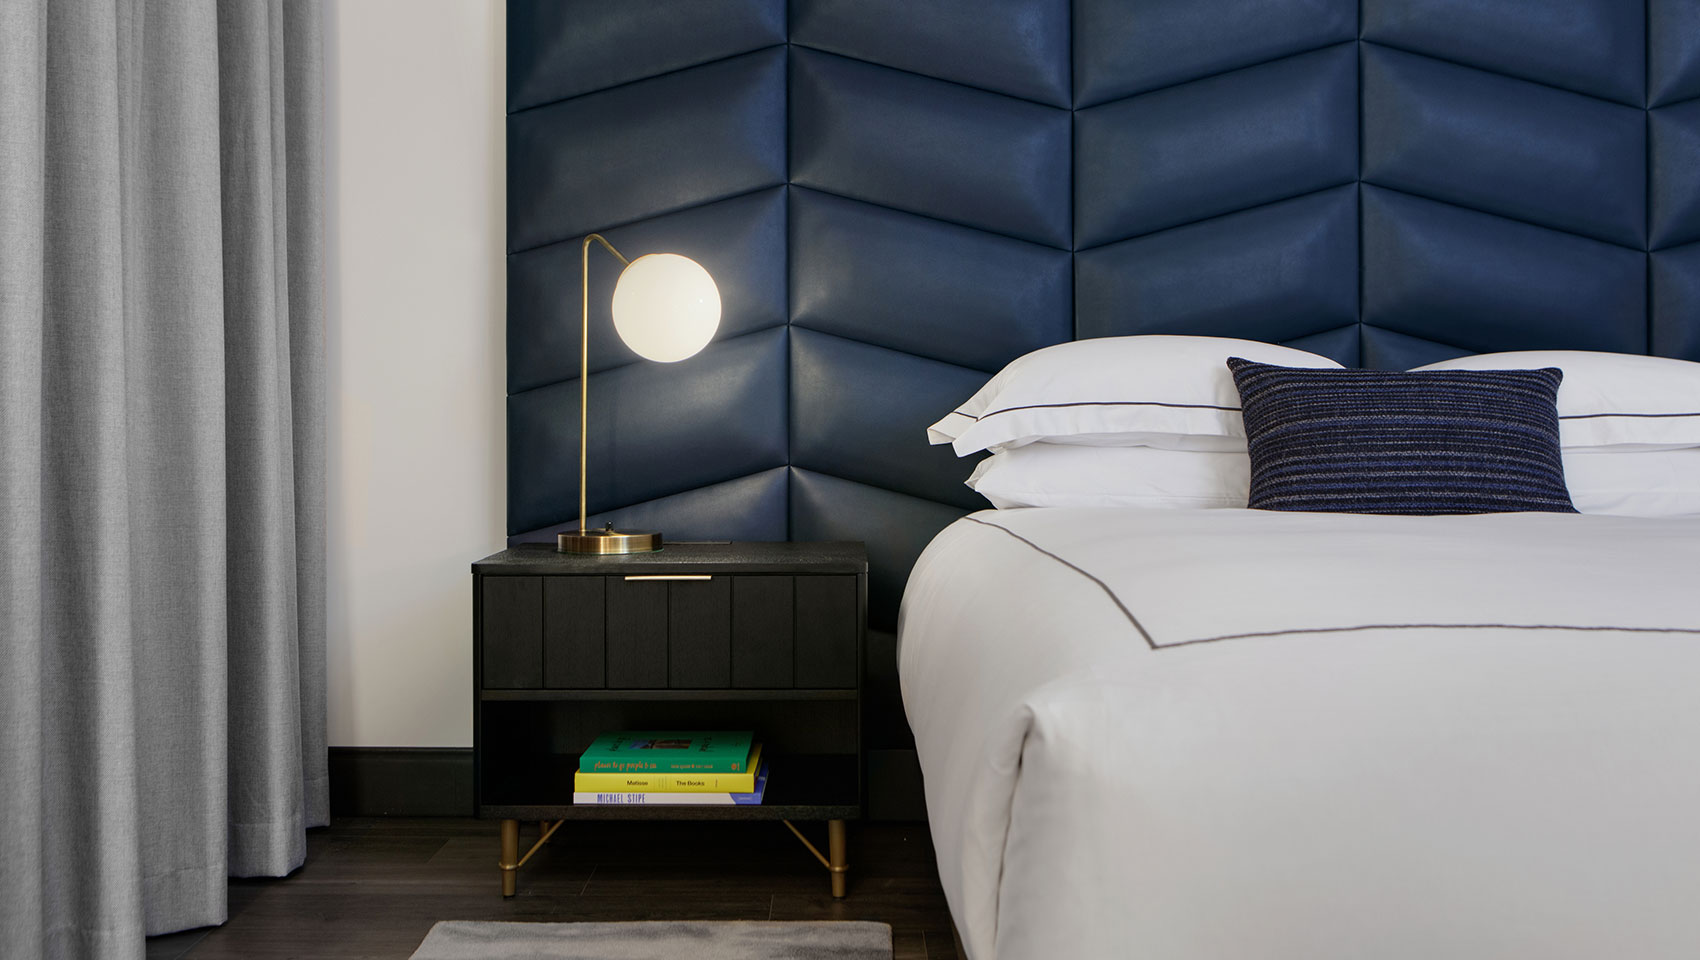 Kimpton Shane guestroom with large white king size bed, nightstand and blue headboard